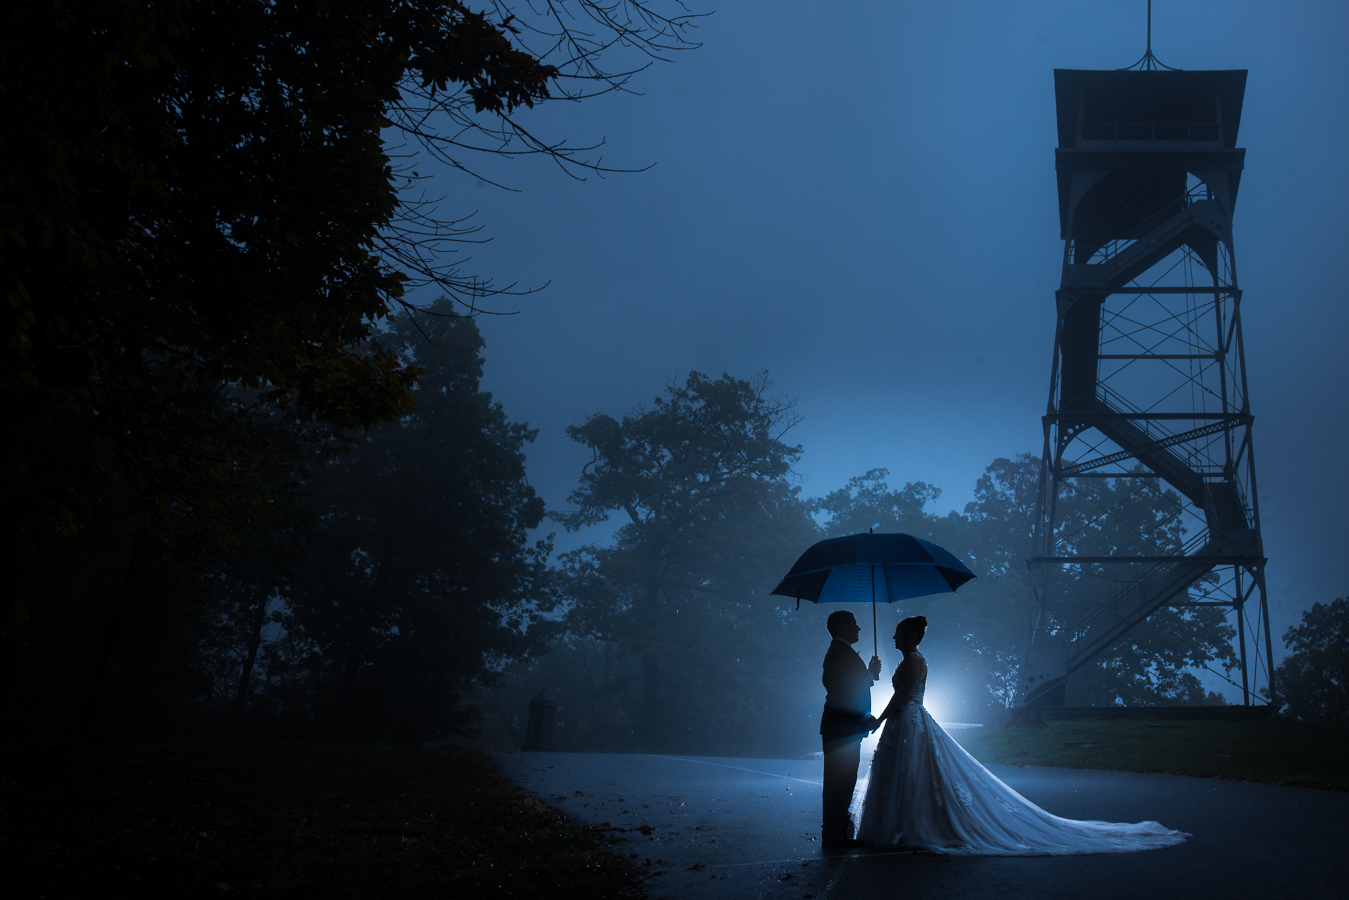 creative wedding photographer, lisa rhinehart, captures this image of the bride and groom as they hold hands underneath the umbrella to avoid the rainy day as they stand beside culps hill inside of the Gettysburg battlefields as the fog surrounds them